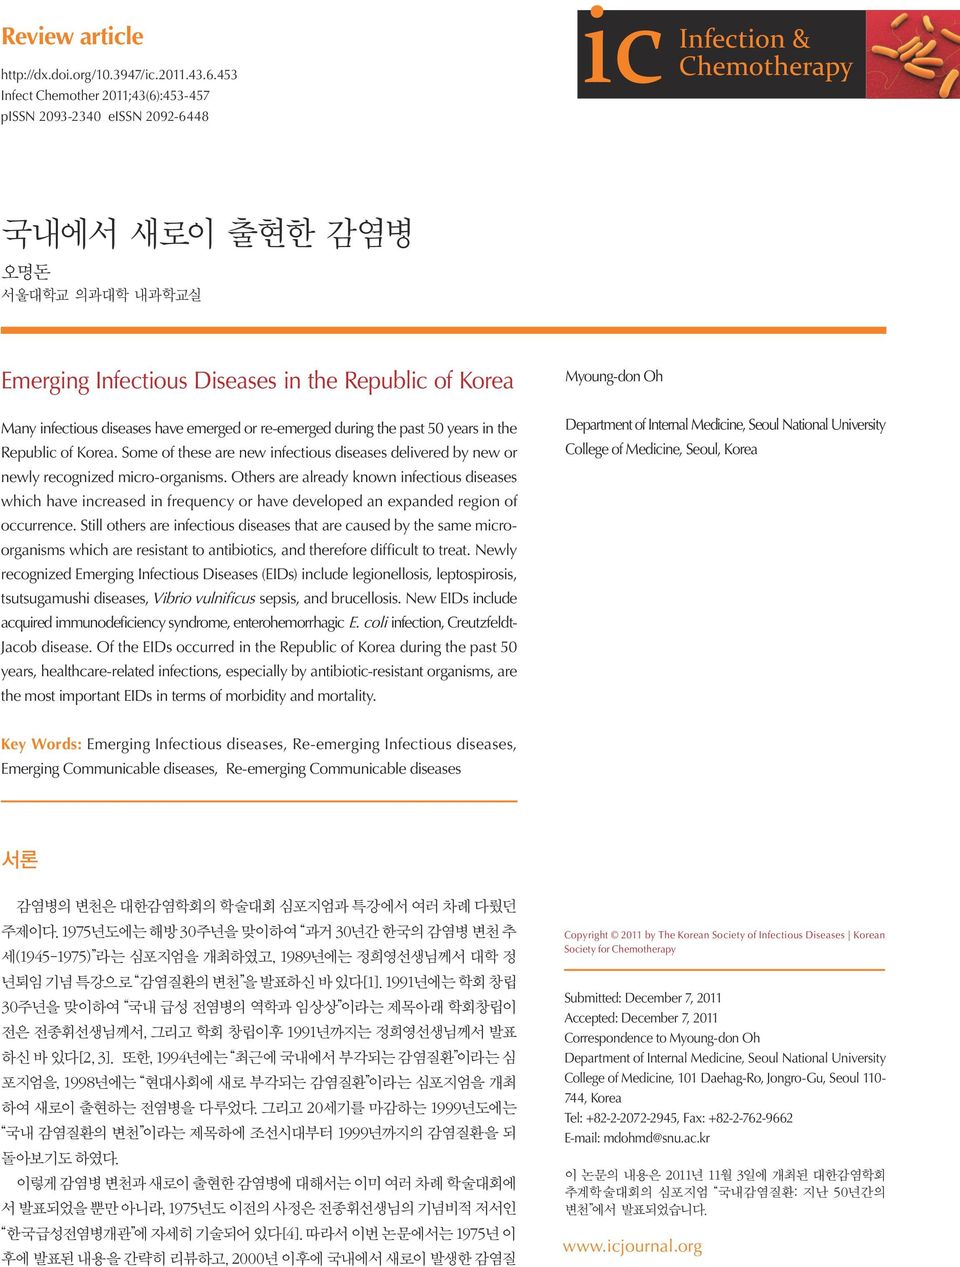 infectious diseases have emerged or re-emerged during the past 50 years in the Republic of Korea. Some of these are new infectious diseases delivered by new or newly recognized micro-organisms.